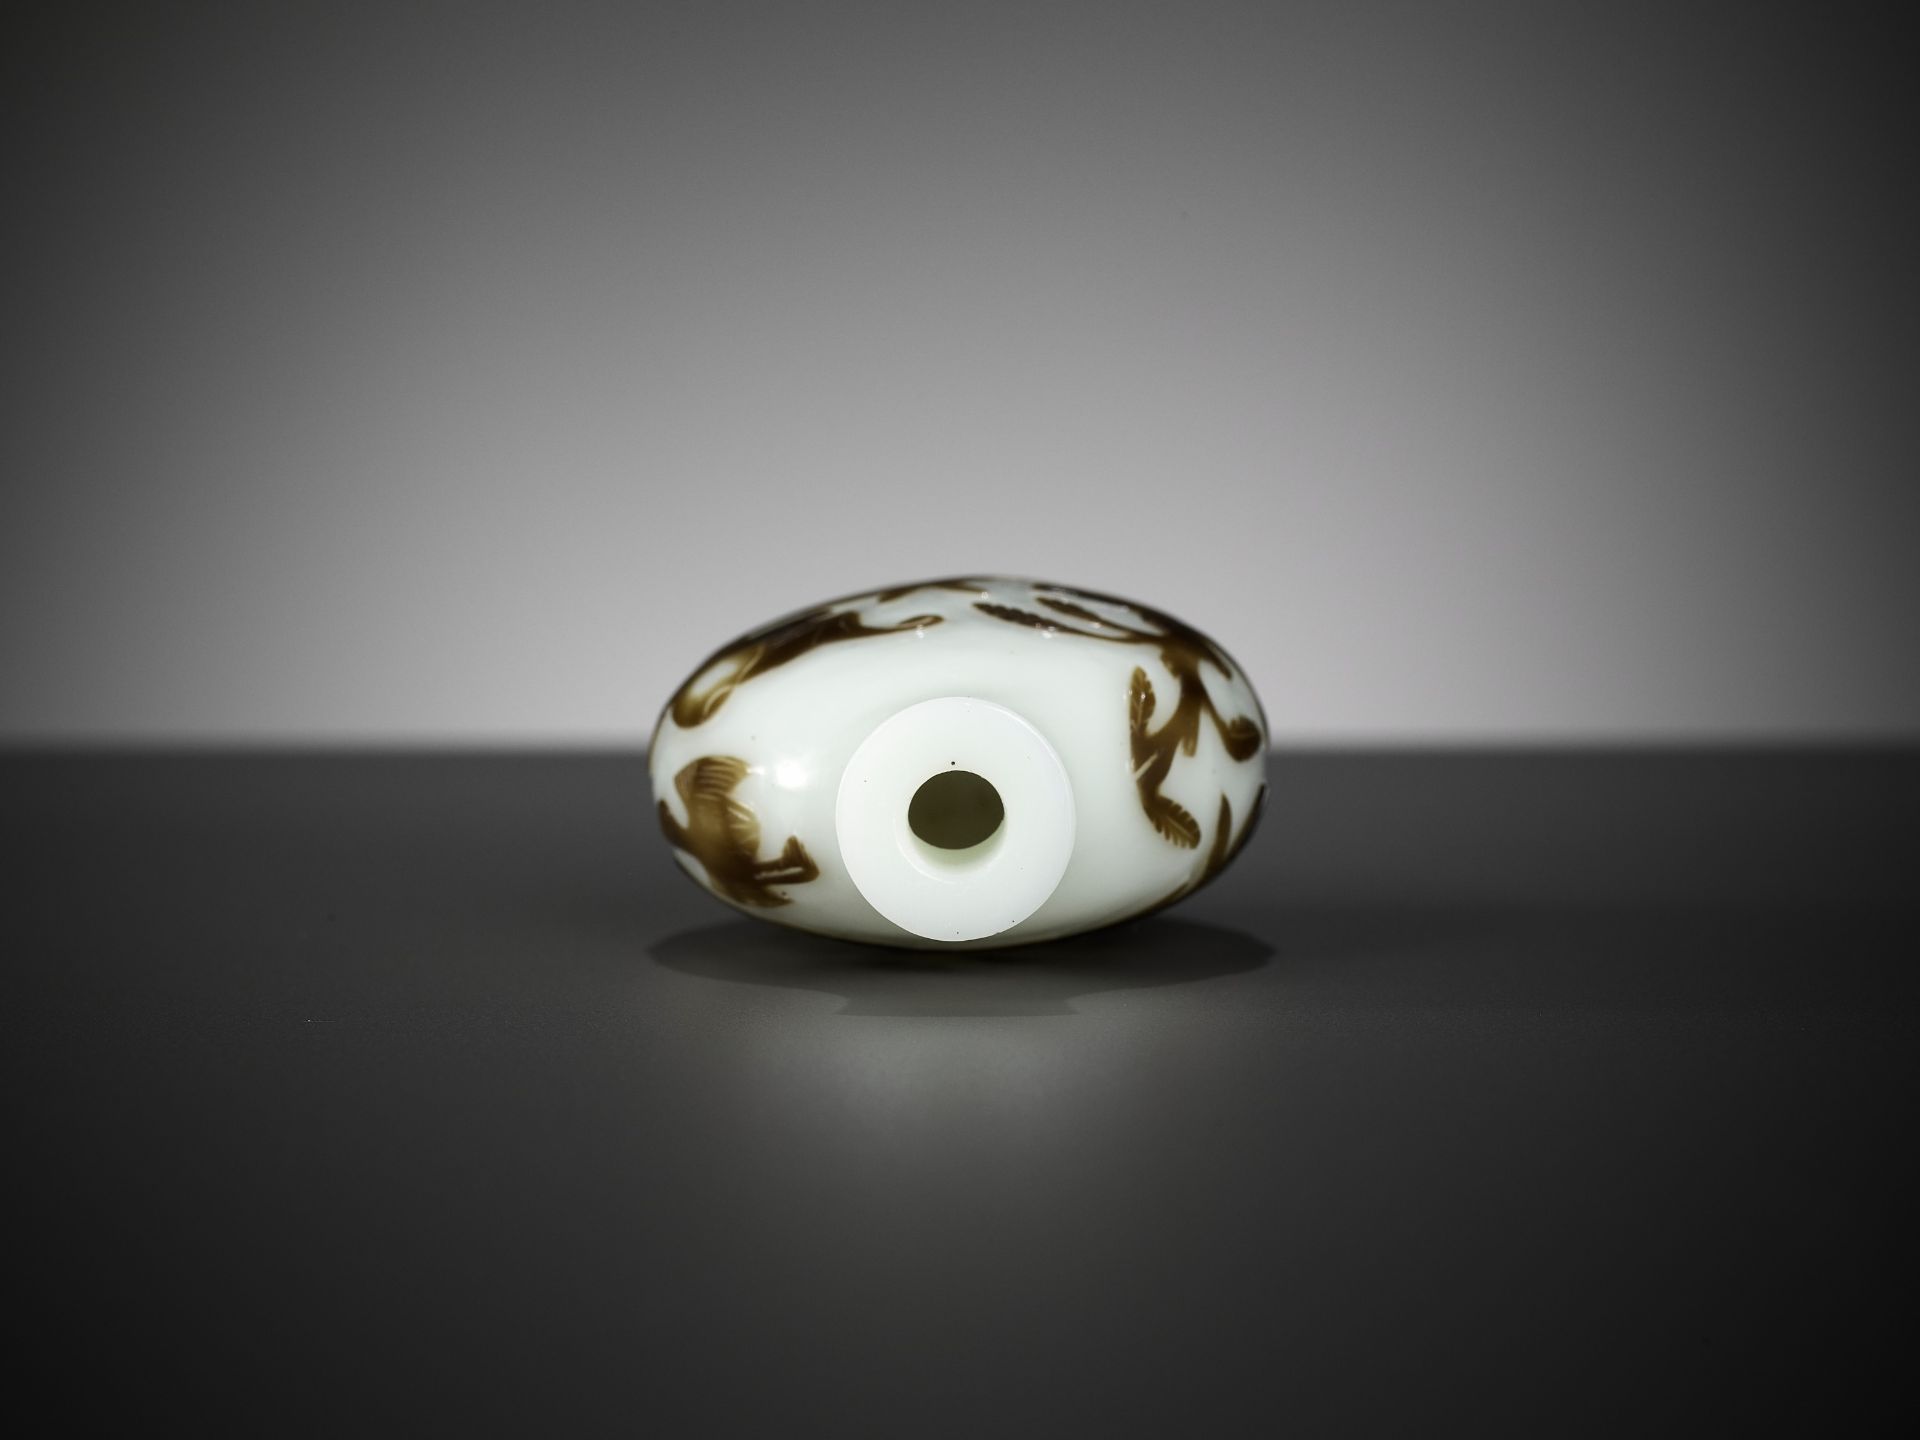 A YANGZHOU OLIVE-BROWN OVERLAY GLASS SNUFF BOTTLE, 1820-1860 - Image 6 of 7